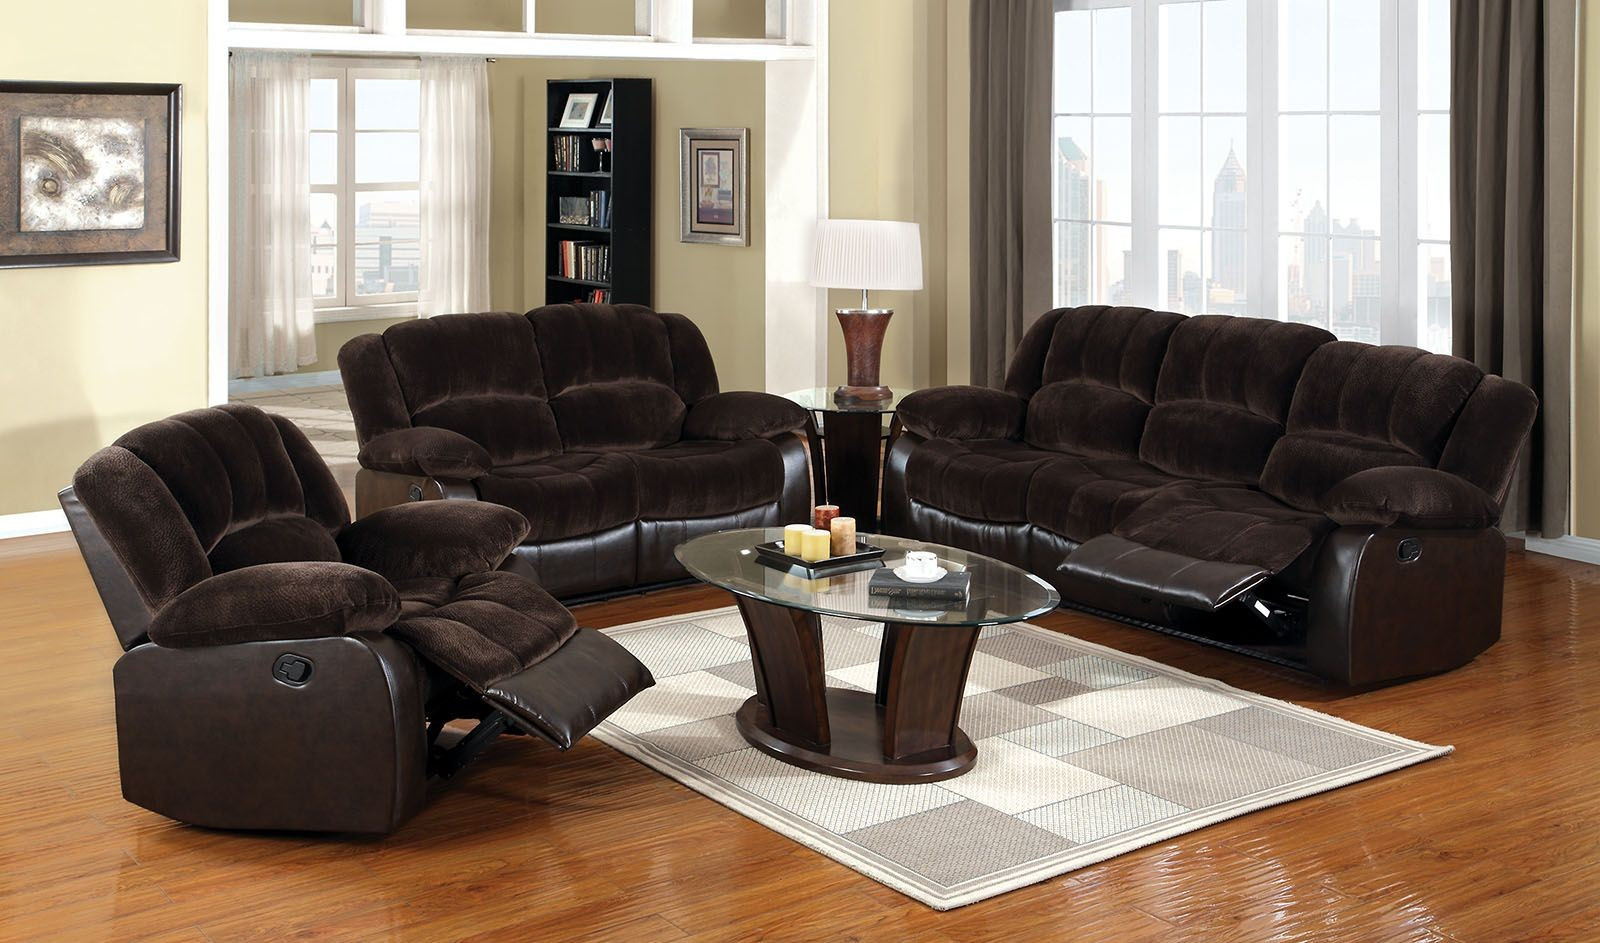 Rustic Living Room Set
 Winslow Rustic Brown Reclining Living Room Set from